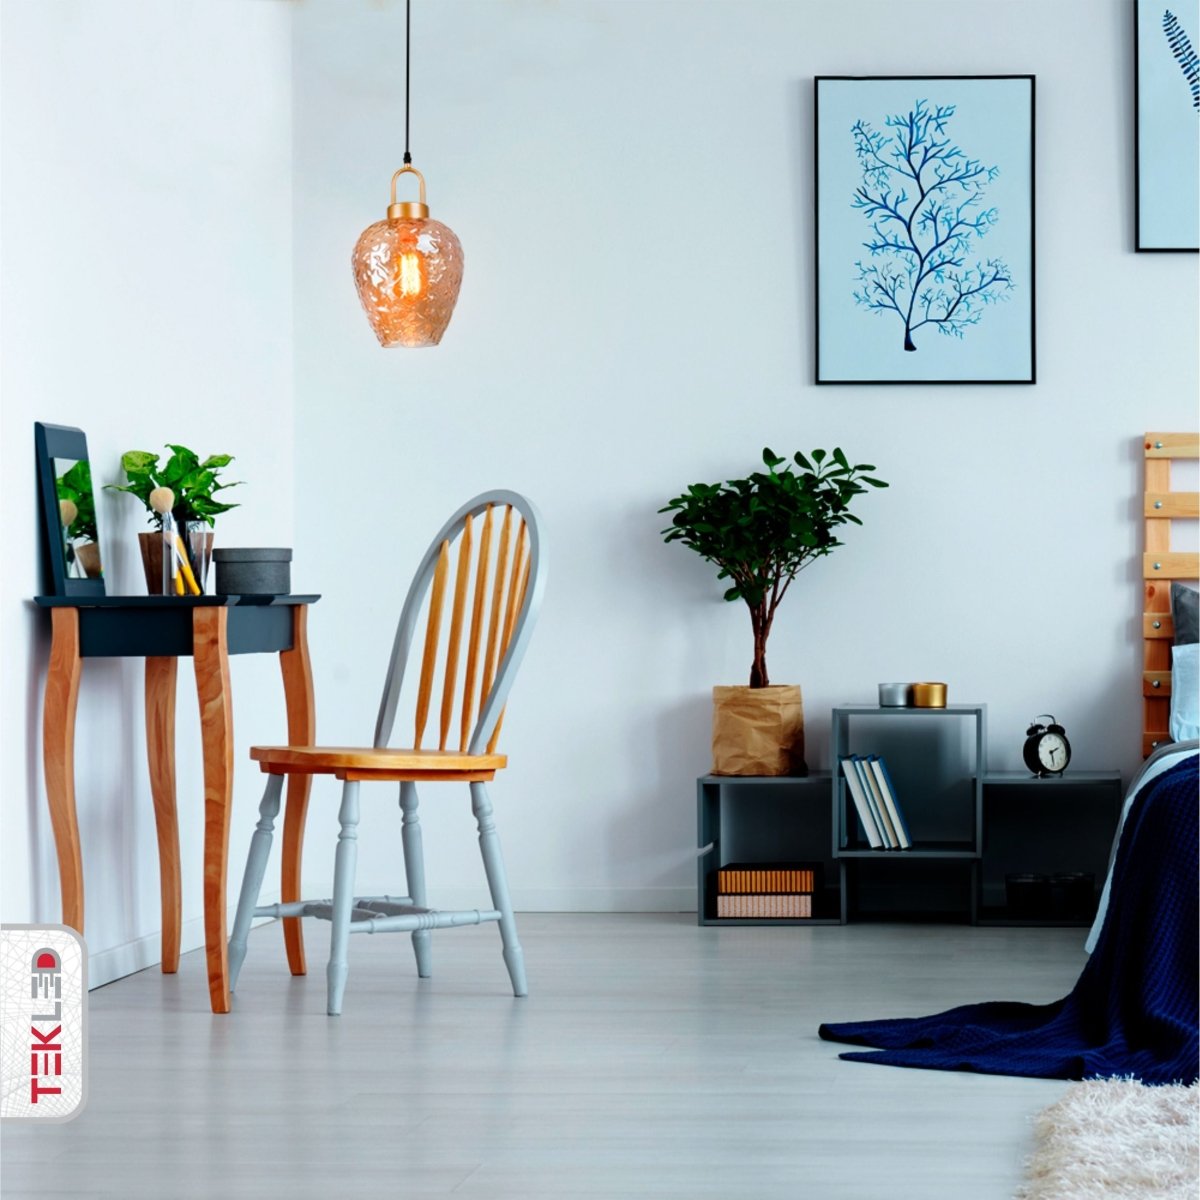 Indoor usage of Miele Lungo Amber Glass Pendant Light with E27 Fitting | TEKLED 159-17494